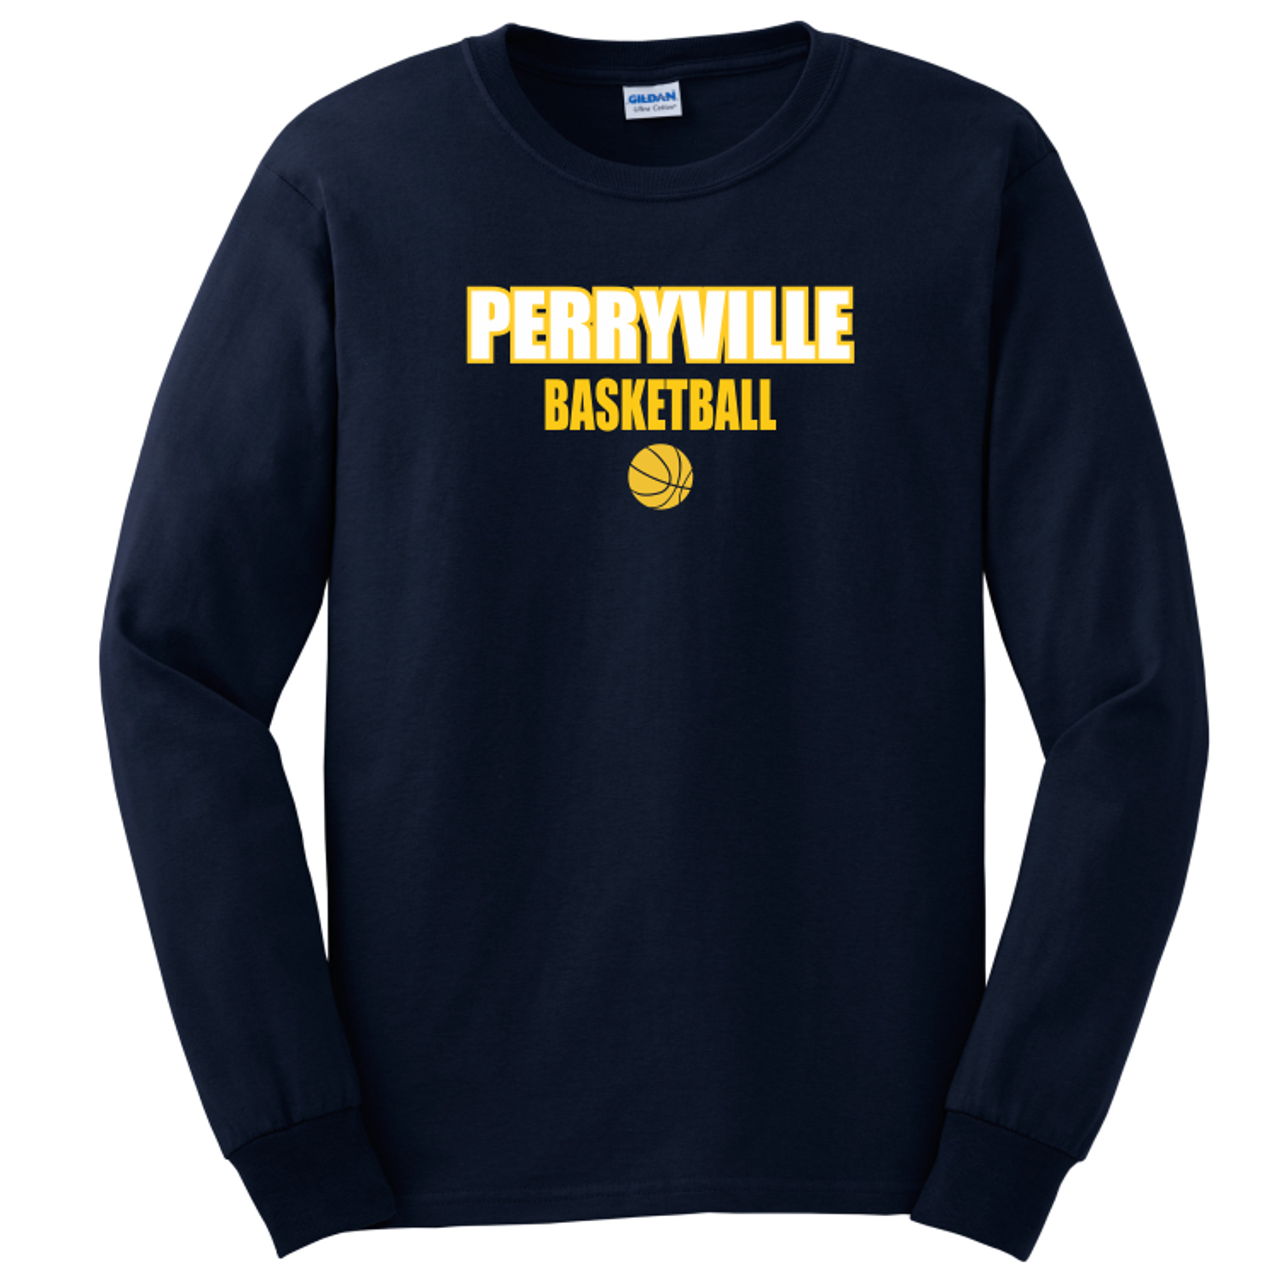 Perryville MS Basketball LONG Sleeve Tee, Navy